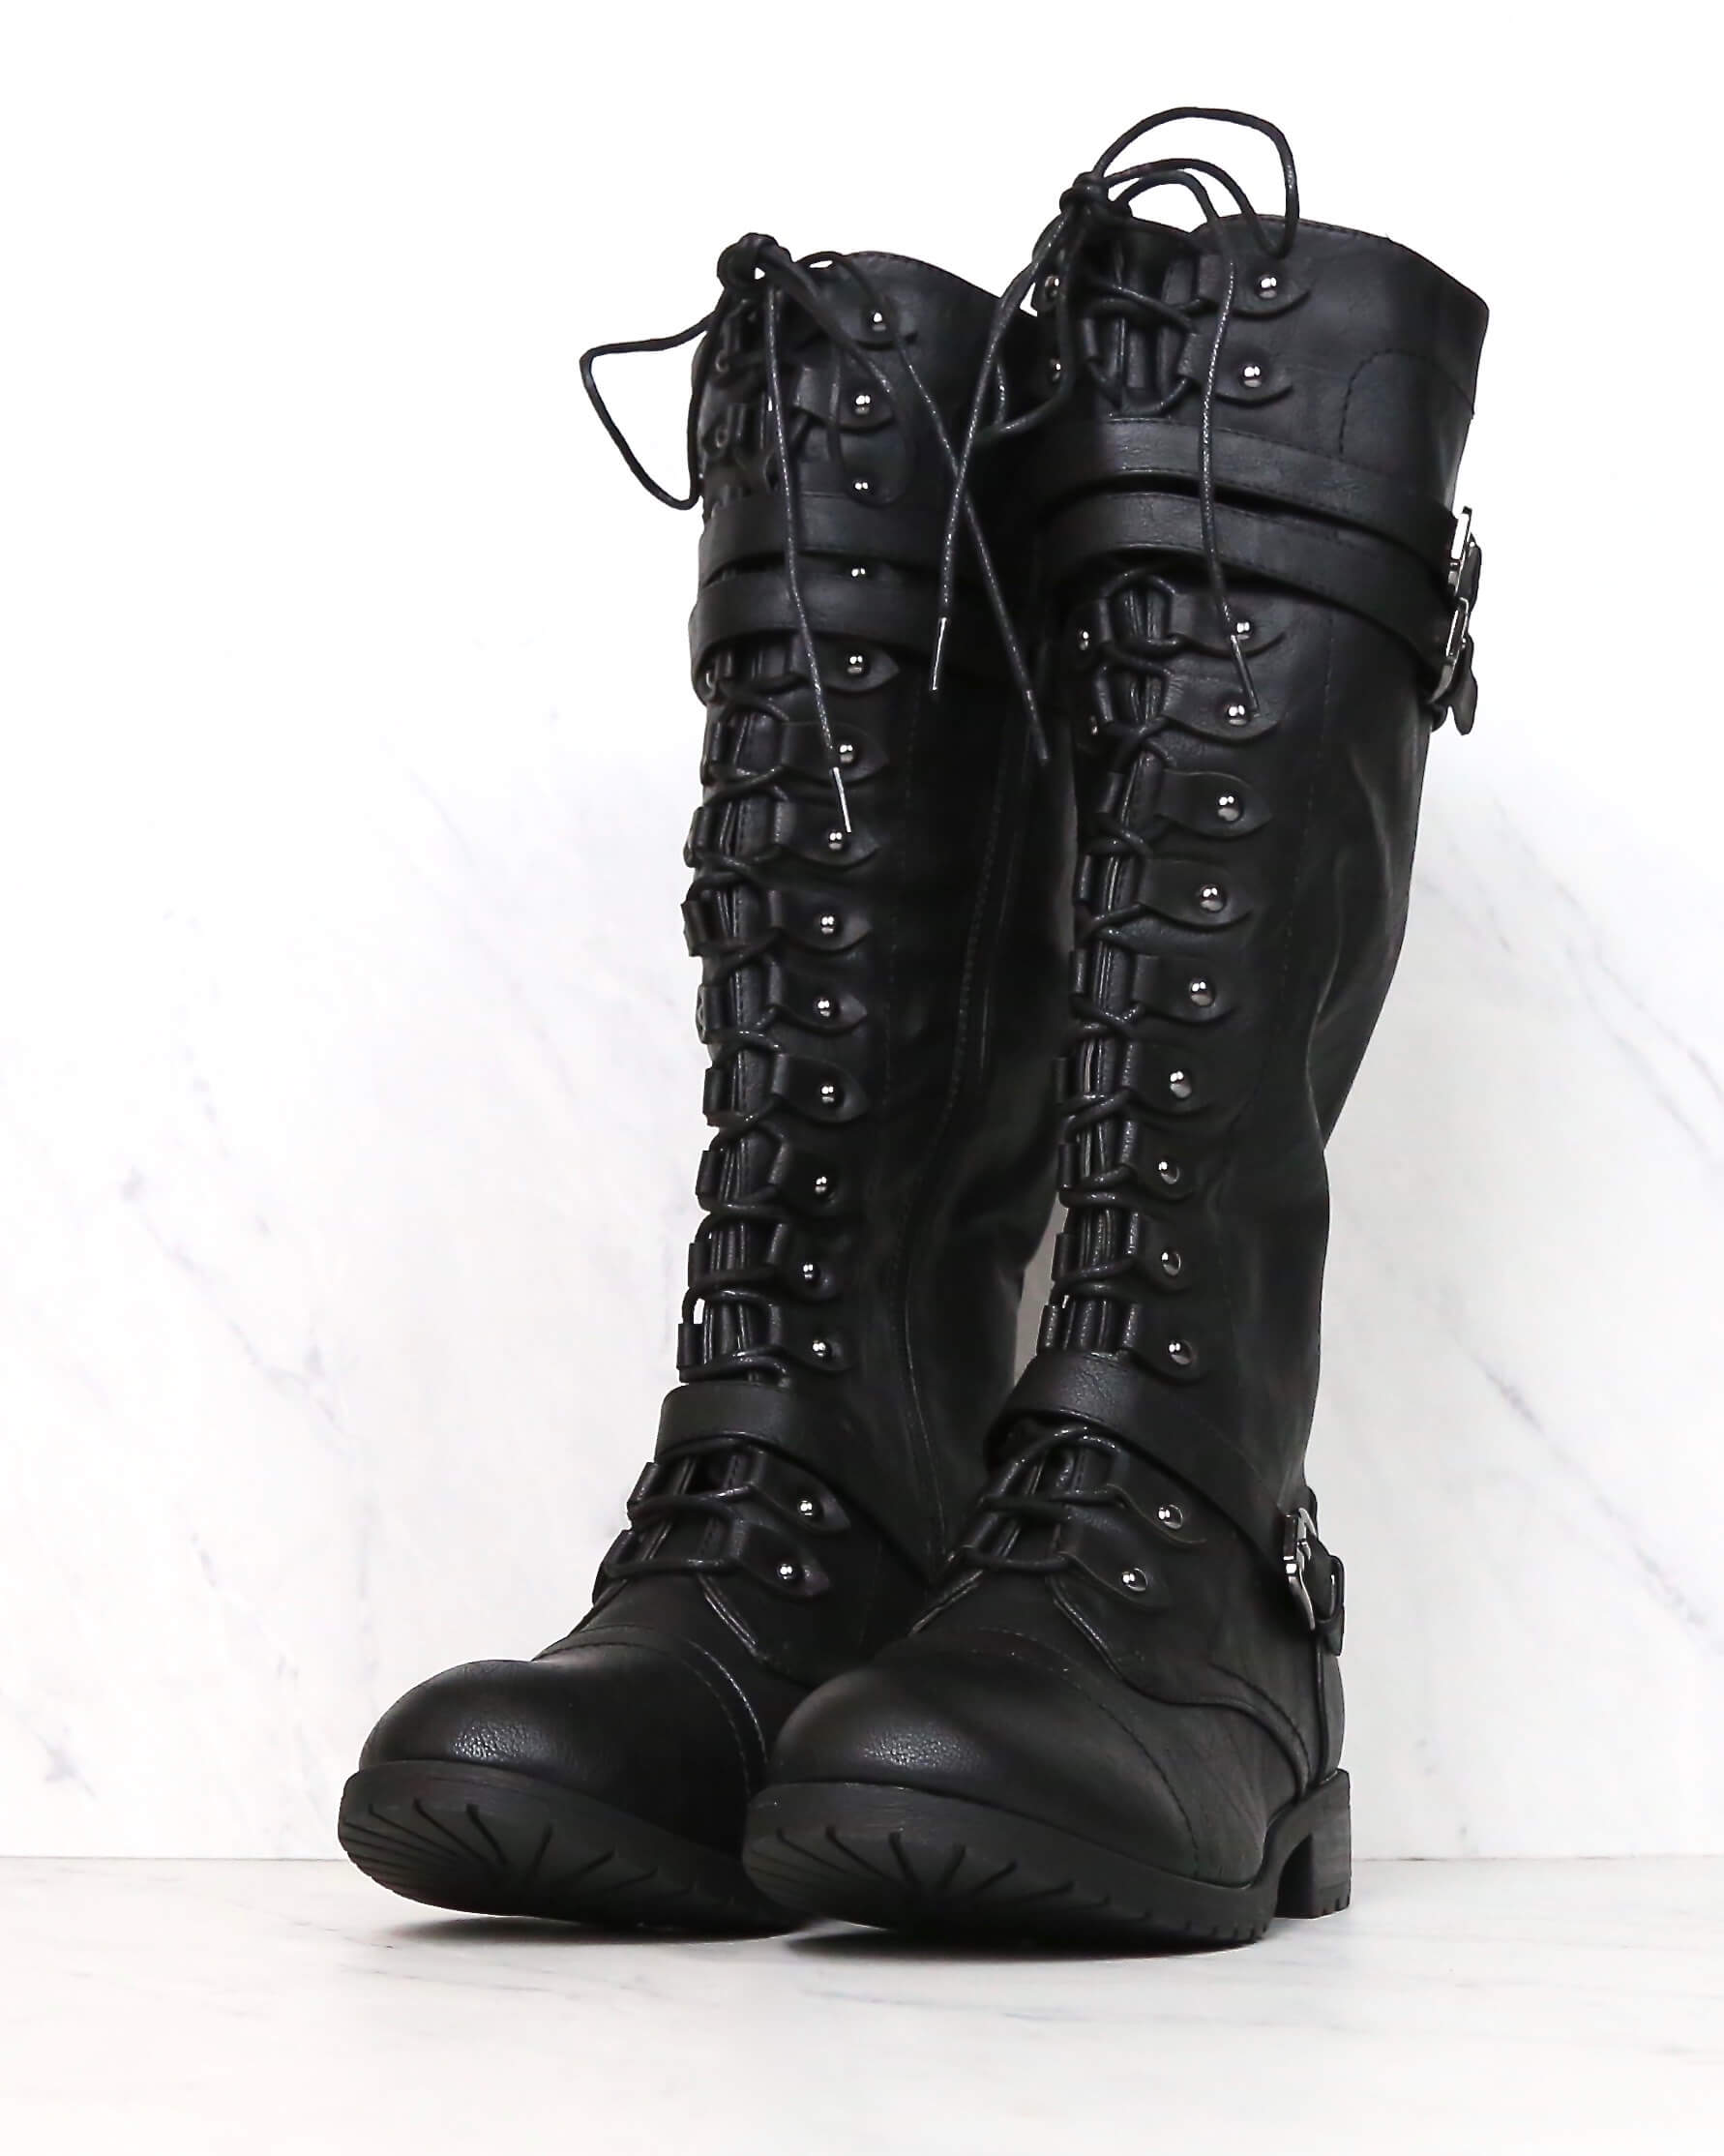 high black lace up boots